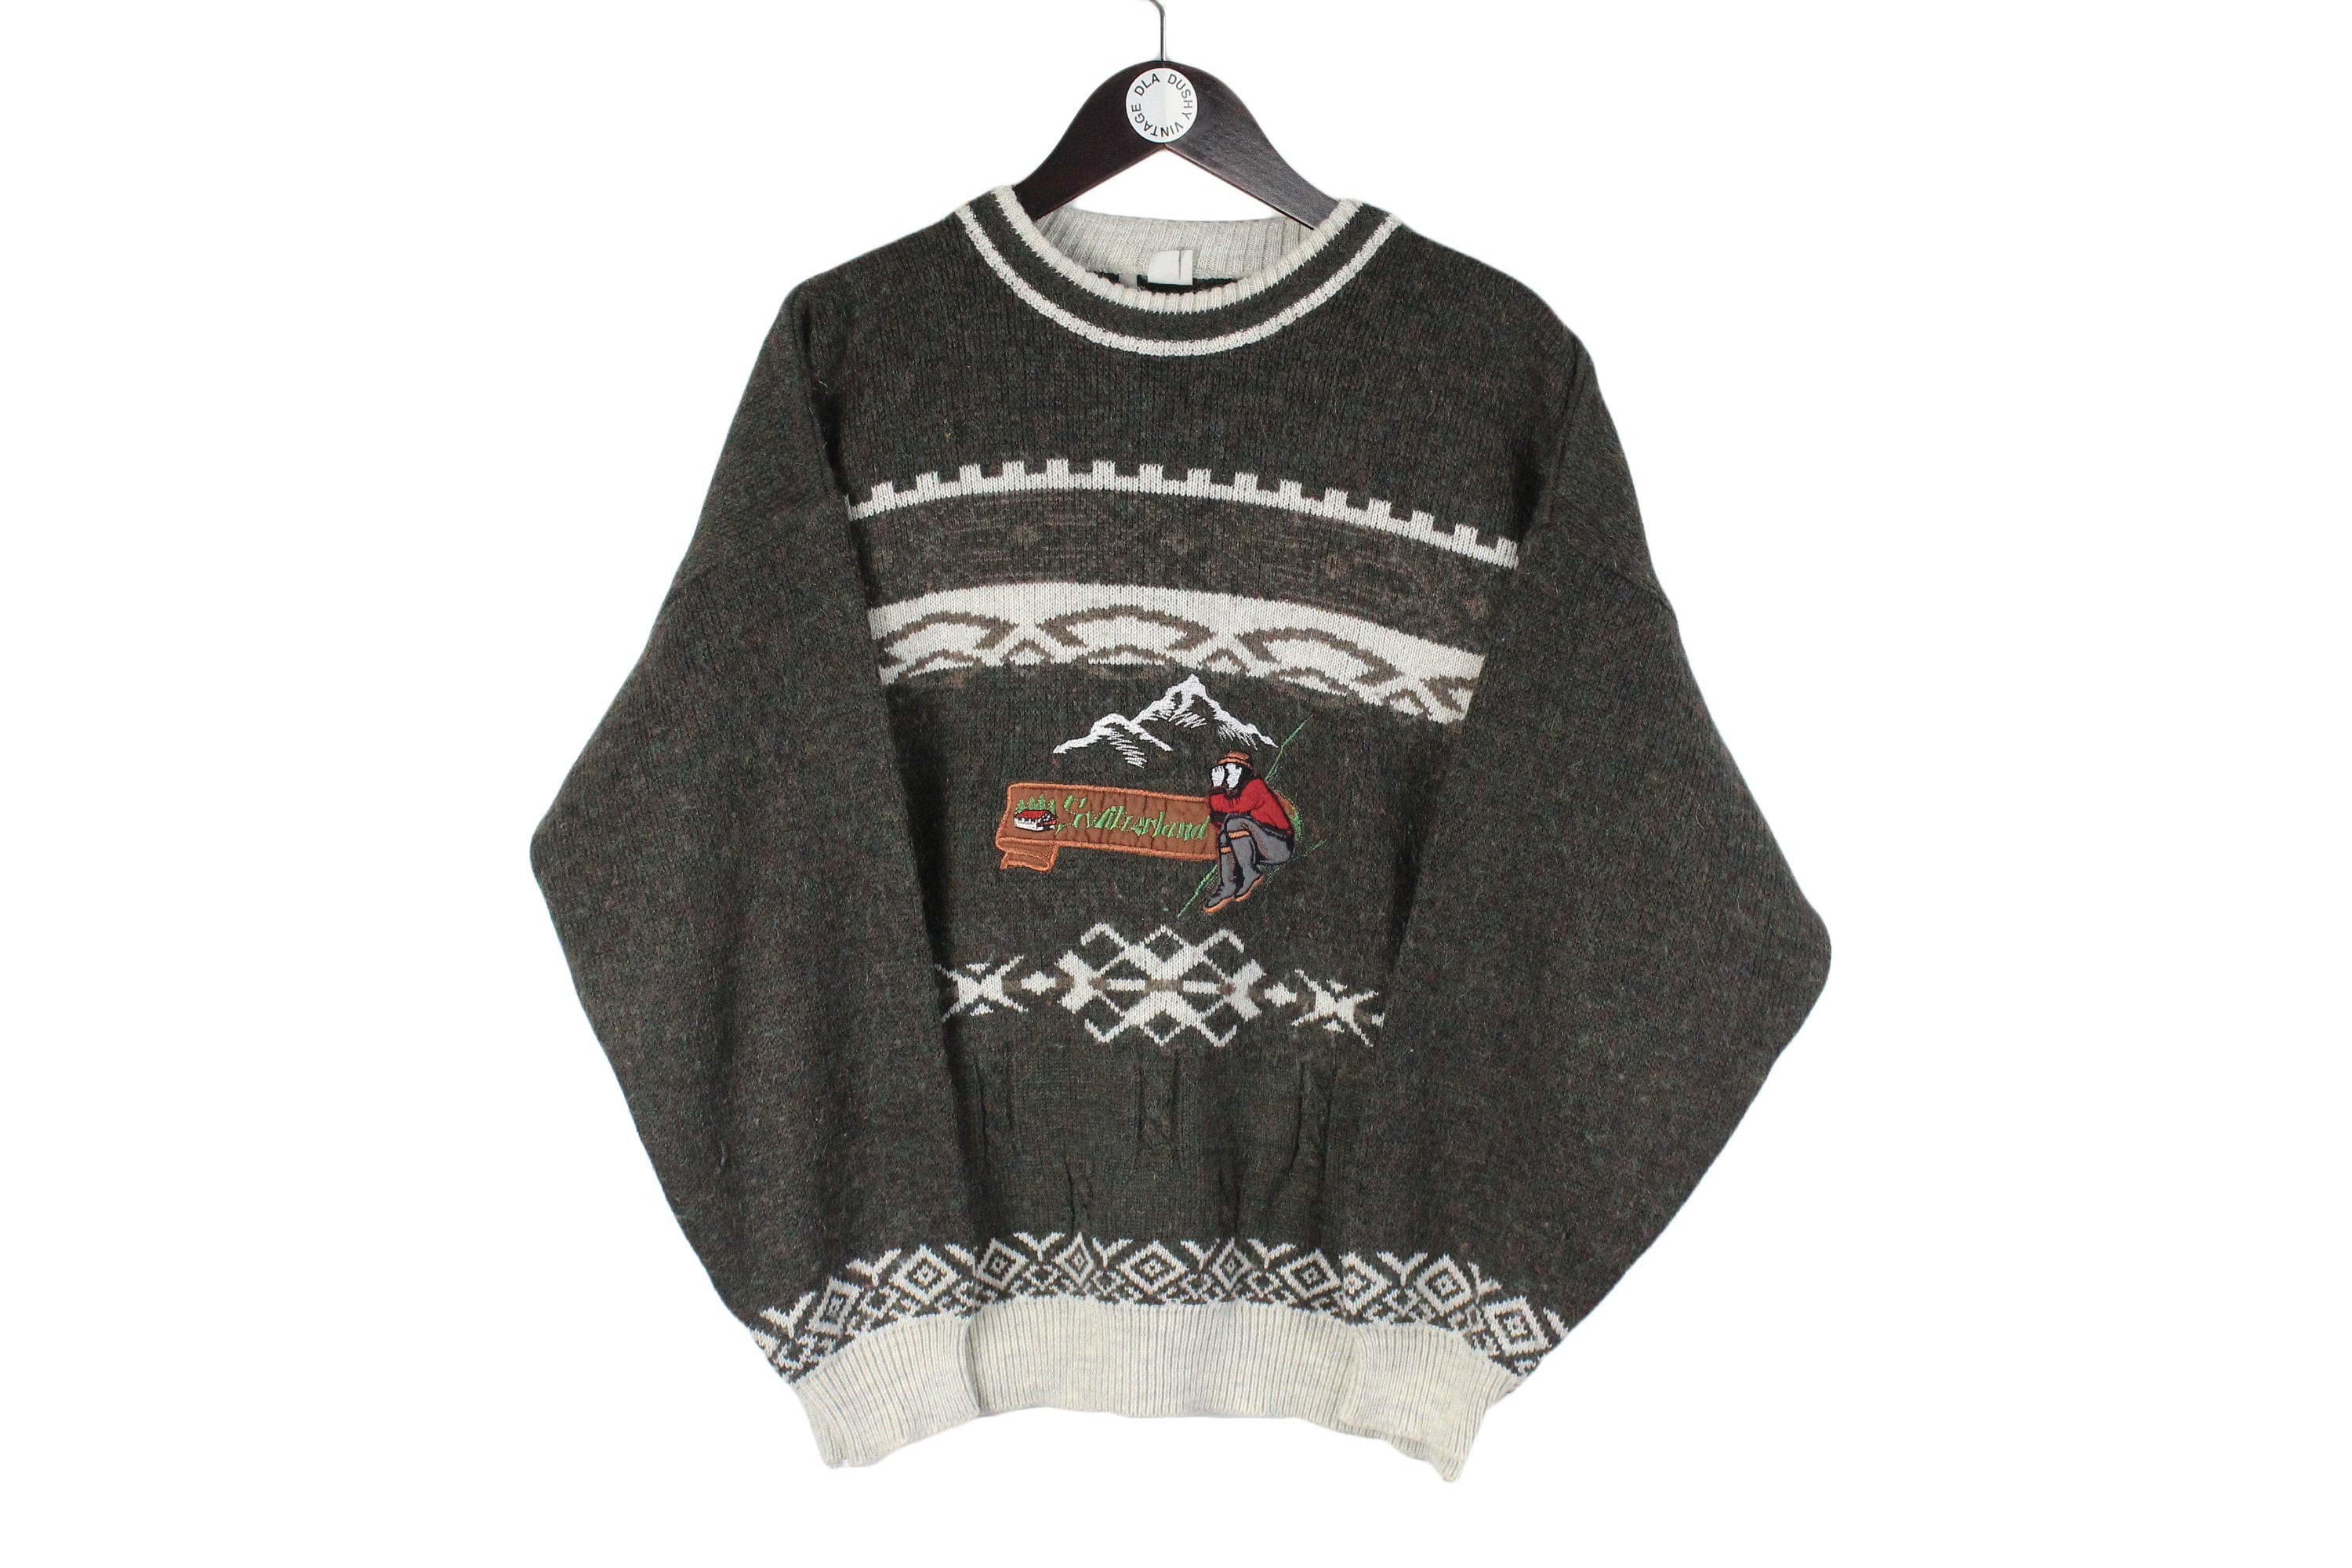 Clothing Mens Clothing Jumpers Pullover Jumpers Vintage 80s Grey Roll Neck Sweater Turtleneck Jumper Mens Knitwear Preppy Sweater Apres Ski Sweater Aztec Pattern Polo Neck Top 1980s Knit 